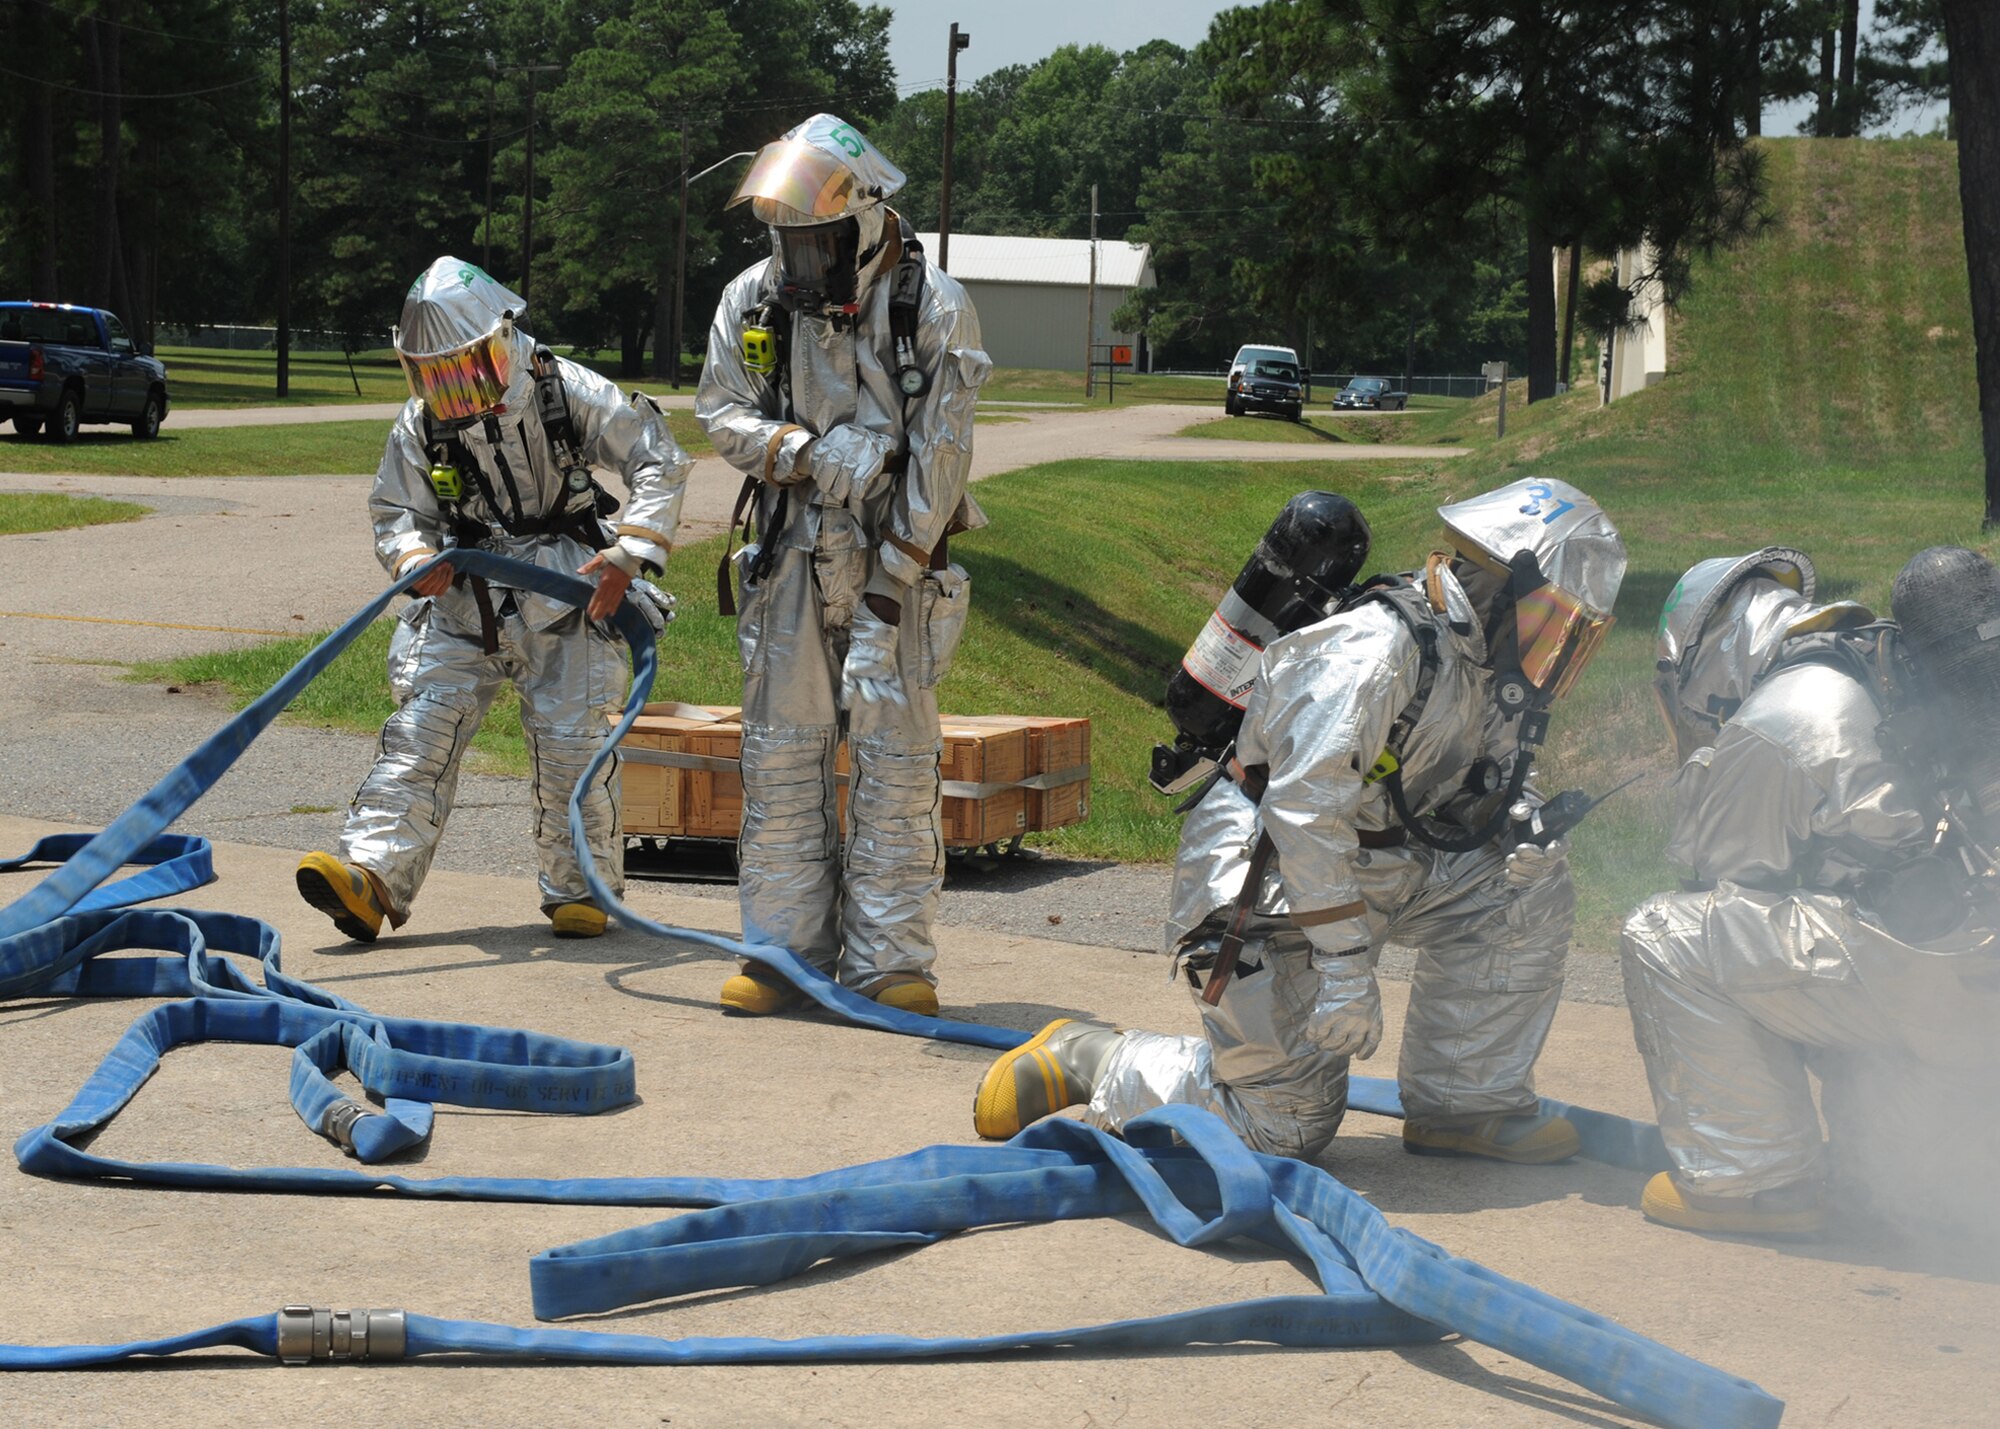 SEYMOUR JOHNSON AIR FORCE BASE, N.C. - Firemen from the 4th Civil Engineer Squadron, move quickly to extinguish a fire as part of the Munitions Major Accident Response Exercise here, July 21. The purpose of the MARE is to exercise first responder?s timely reaction in the event of a real world situation.  (U.S. Air Force photo by Airman 1st Class Whitney S. Stanfield)